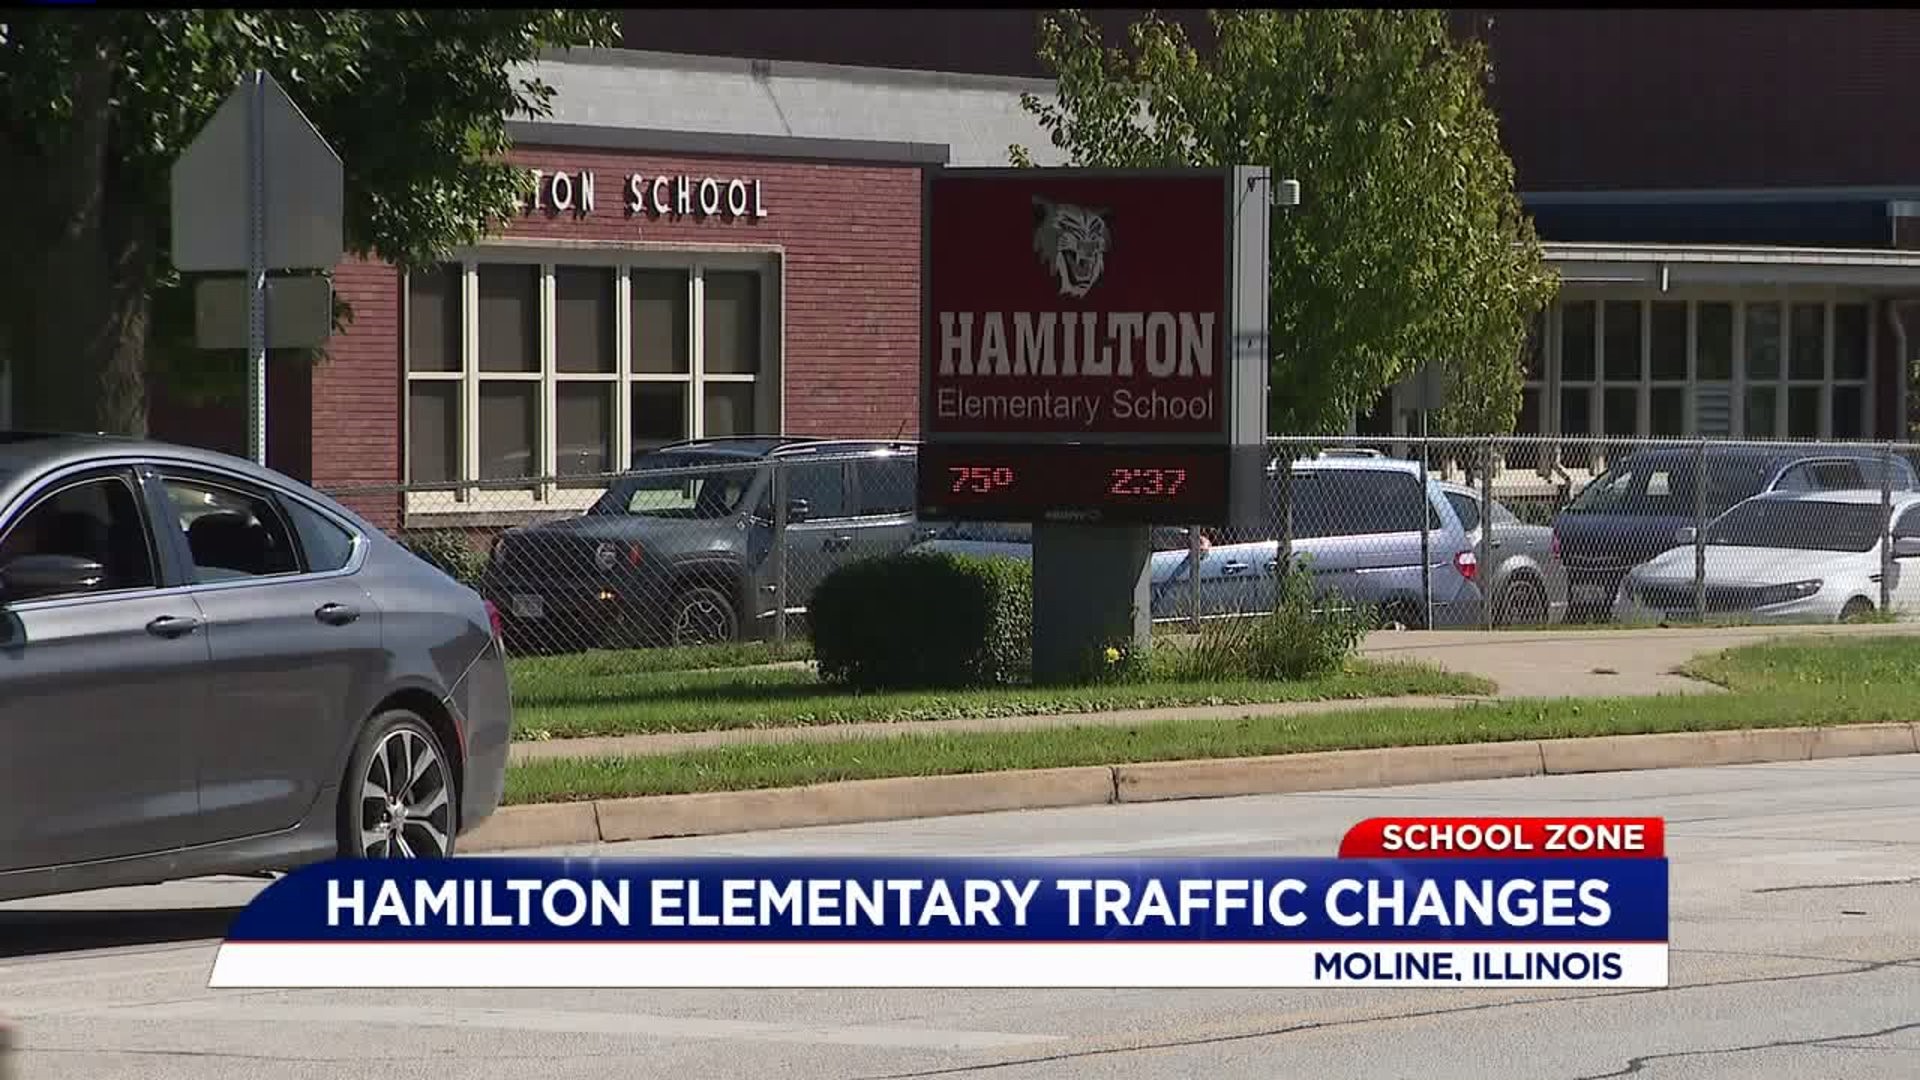 Traffic changes aim to make Hamilton school area safer for students